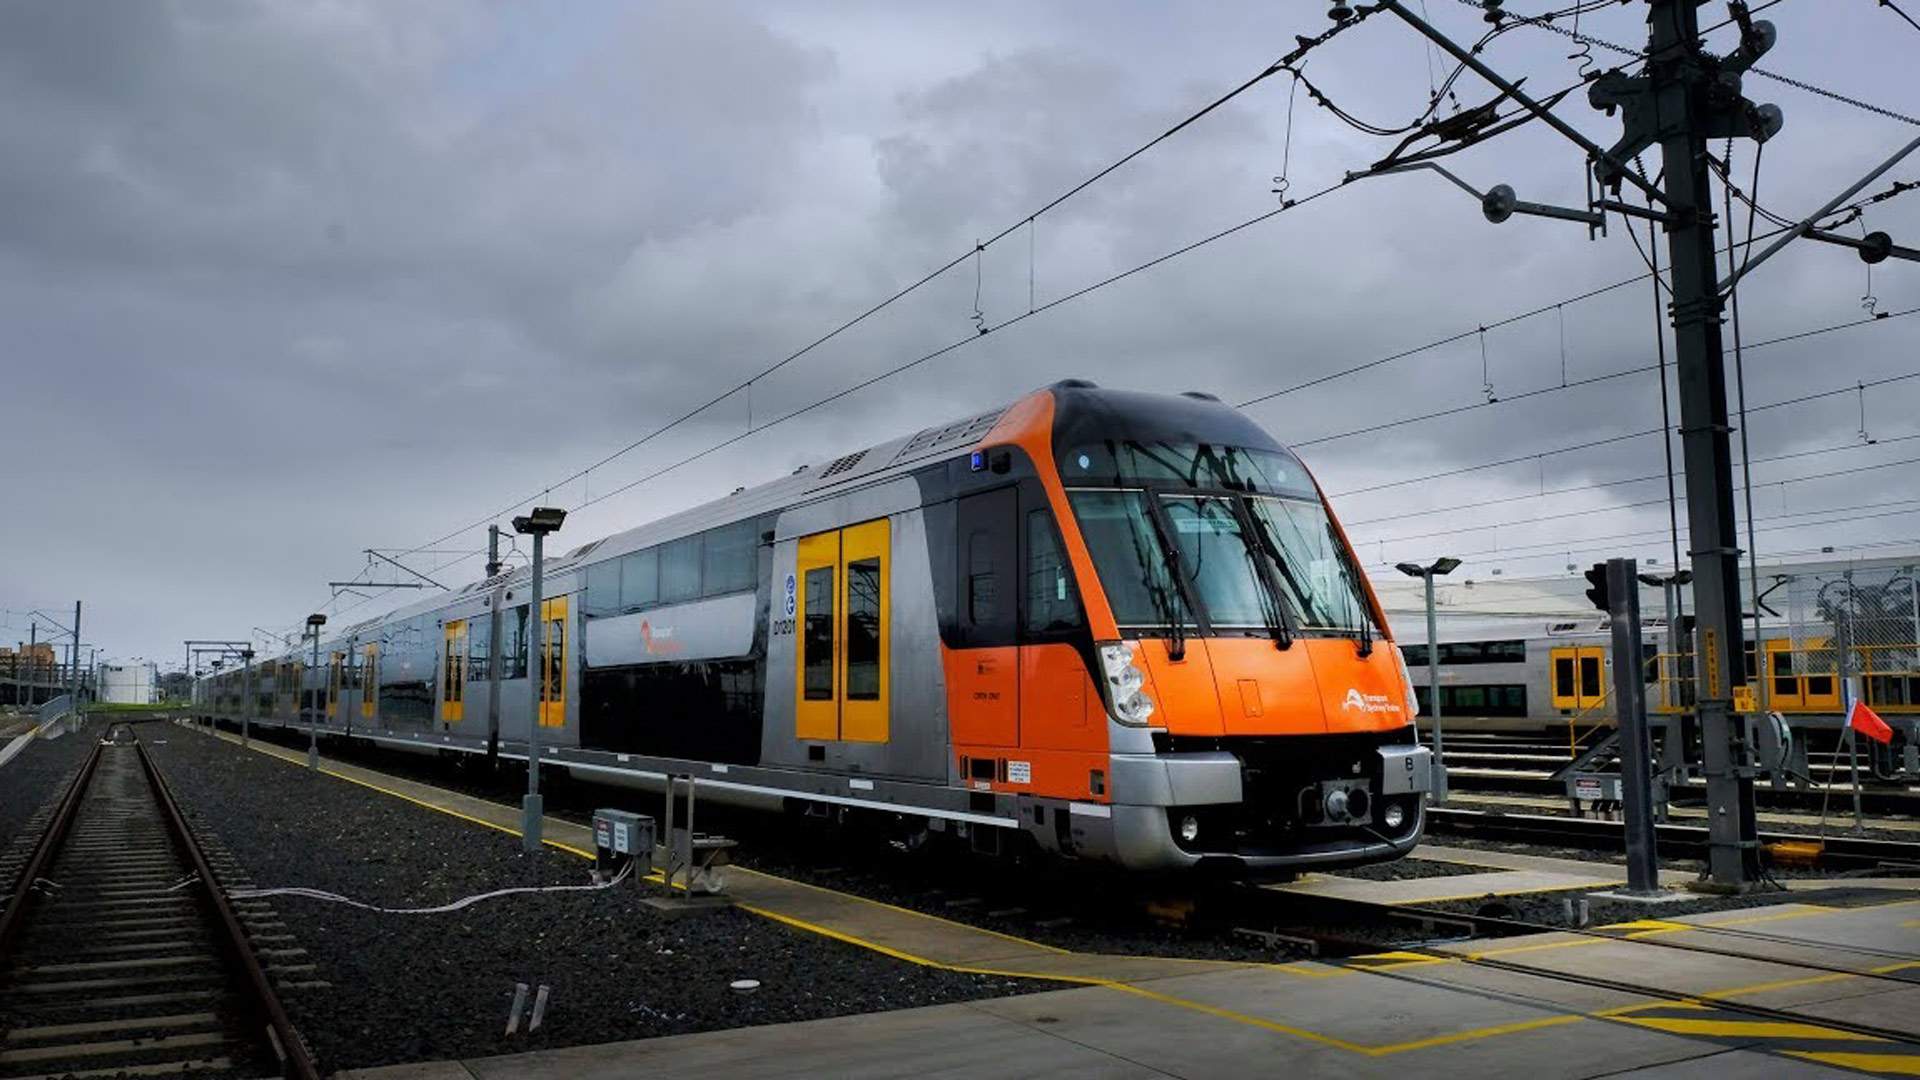 Sydney Is Set to Score $900 Million Worth of New Air-Conditioned Trains Next Year